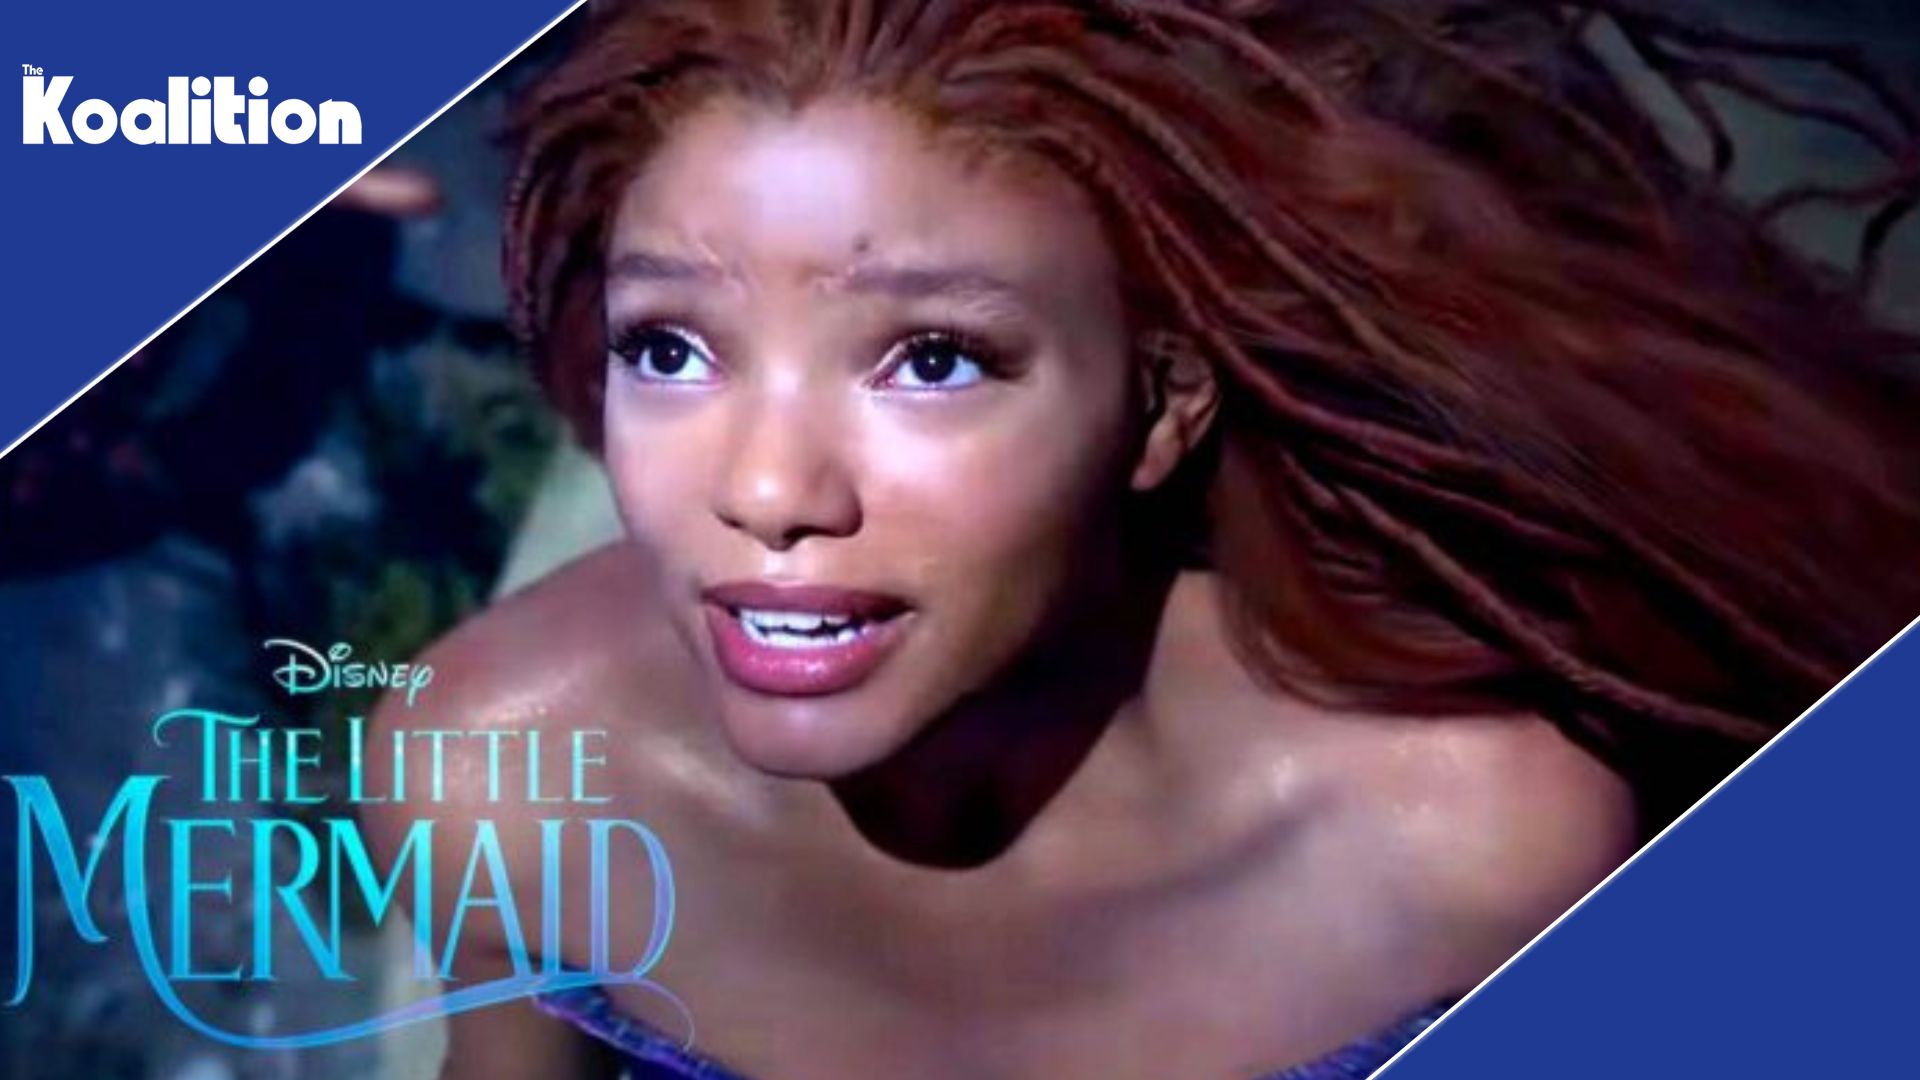 D23 Expo – The Little Mermaid Footage Description, Part of Your World Is a Showstopper – The Koalition